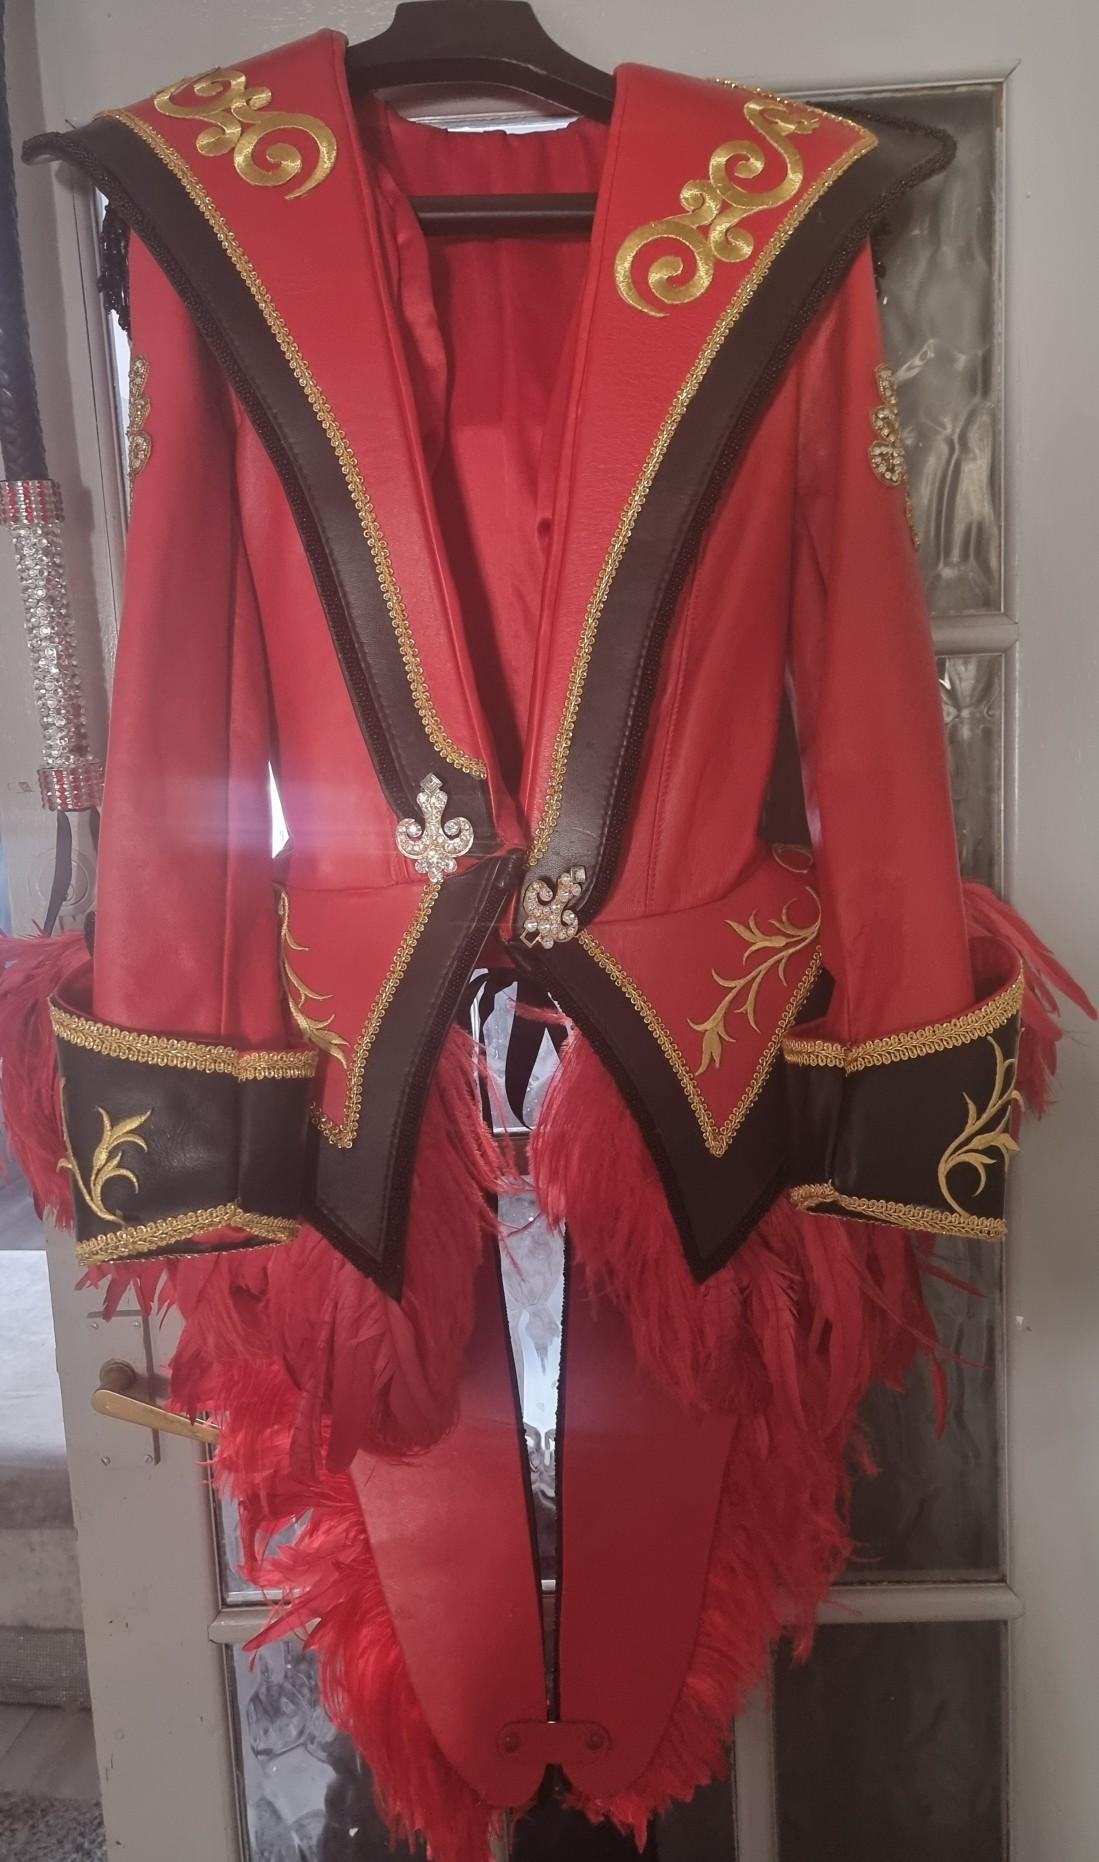 circus ring leader costume in RM1 London for £50.00 for sale | Shpock